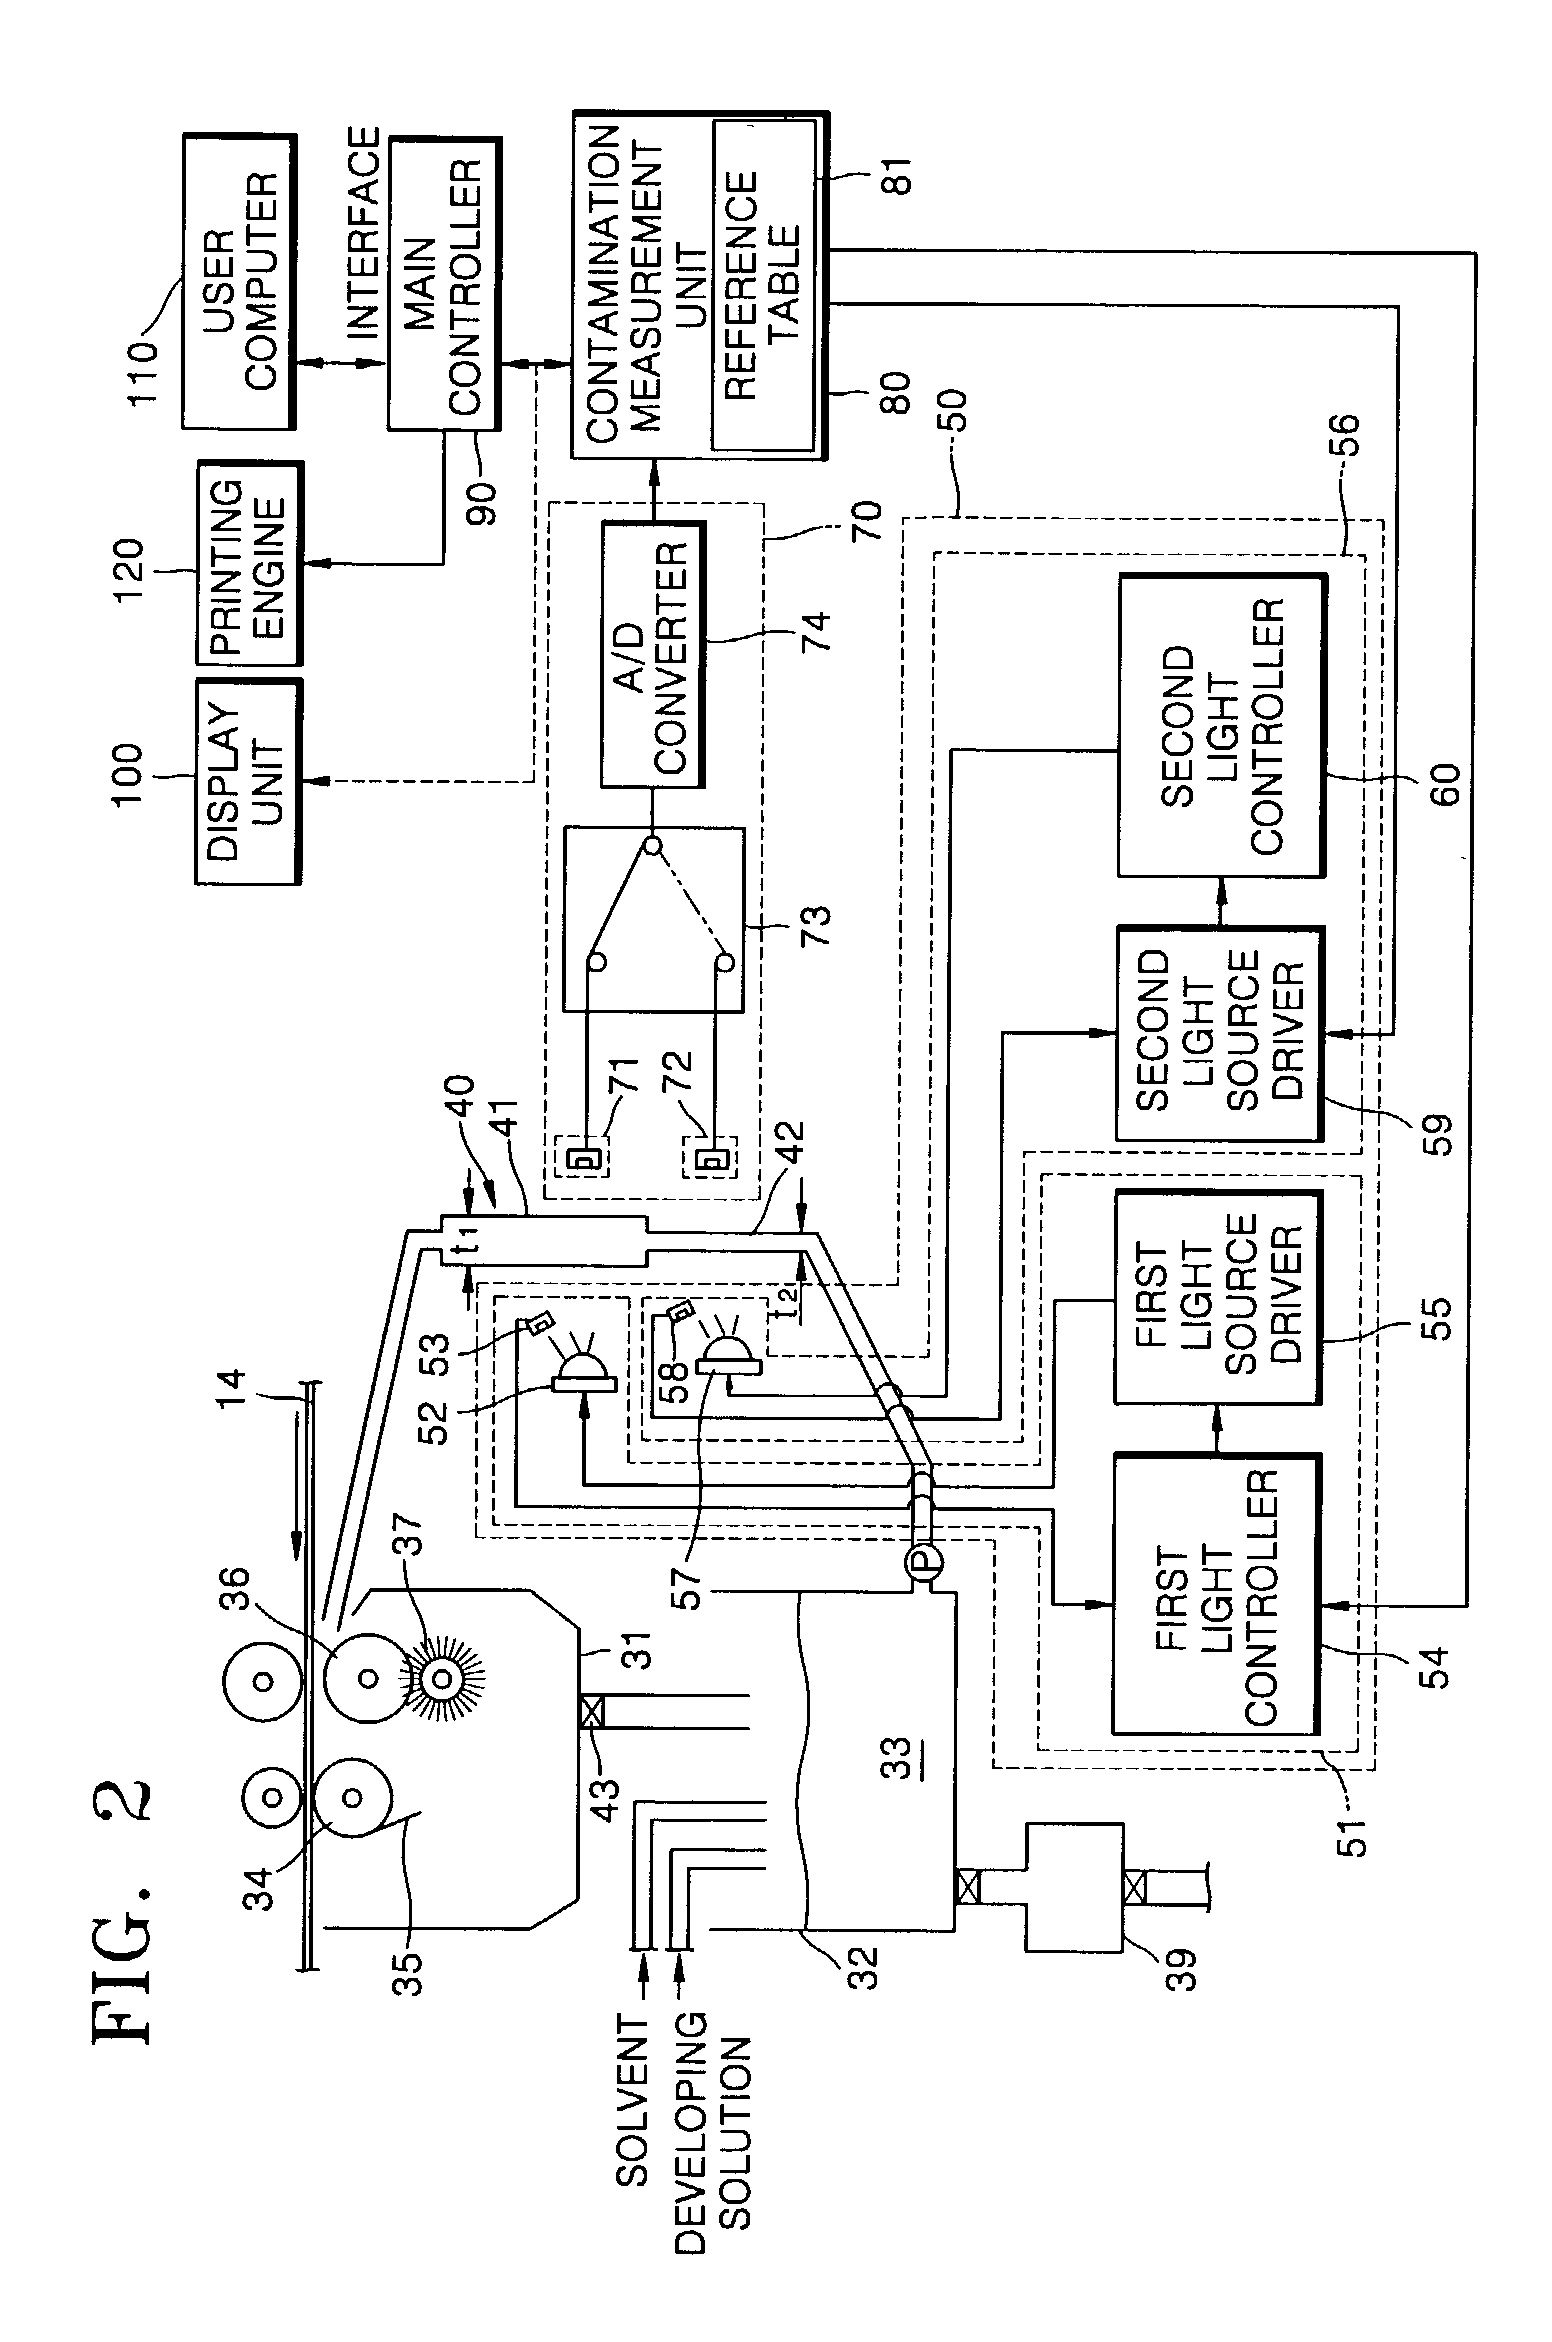 Method of determining time to replace developing solution of printer